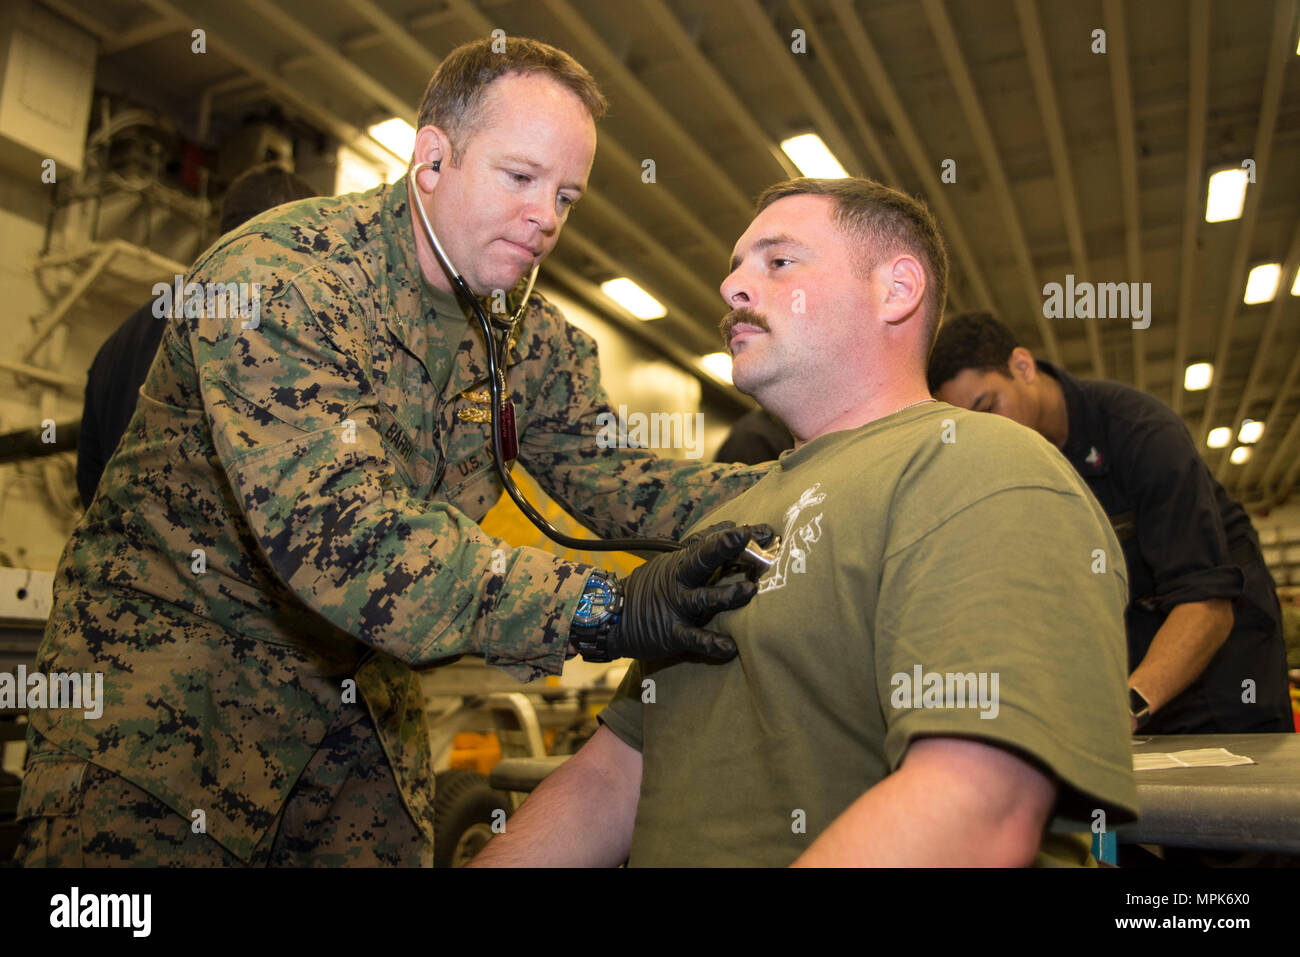 170323-N-XT039-235 PHILIPPINE SEA (March 23, 2017) Cmdr. Michael Barry, left, from Clarksville, Tenn., assigned to Combat Logistics Battalion (CLB) 31 of the 31st Marine Expeditionary Unit (MEU), conducts a medical screening exam on Hospital Corpsman 3rd Class Jared Kepler, from Maple Valley, Wash., during a simulated non-combatant evacuation operation (NEO) in the hangar bay of the amphibious assault ship USS Bonhomme Richard (LHD 6) as part of a certification exercise (CERTEX). A NEO is an exercise conducted to ensure commands can quickly and efficiently complete the task of evacuating non-c Stock Photo